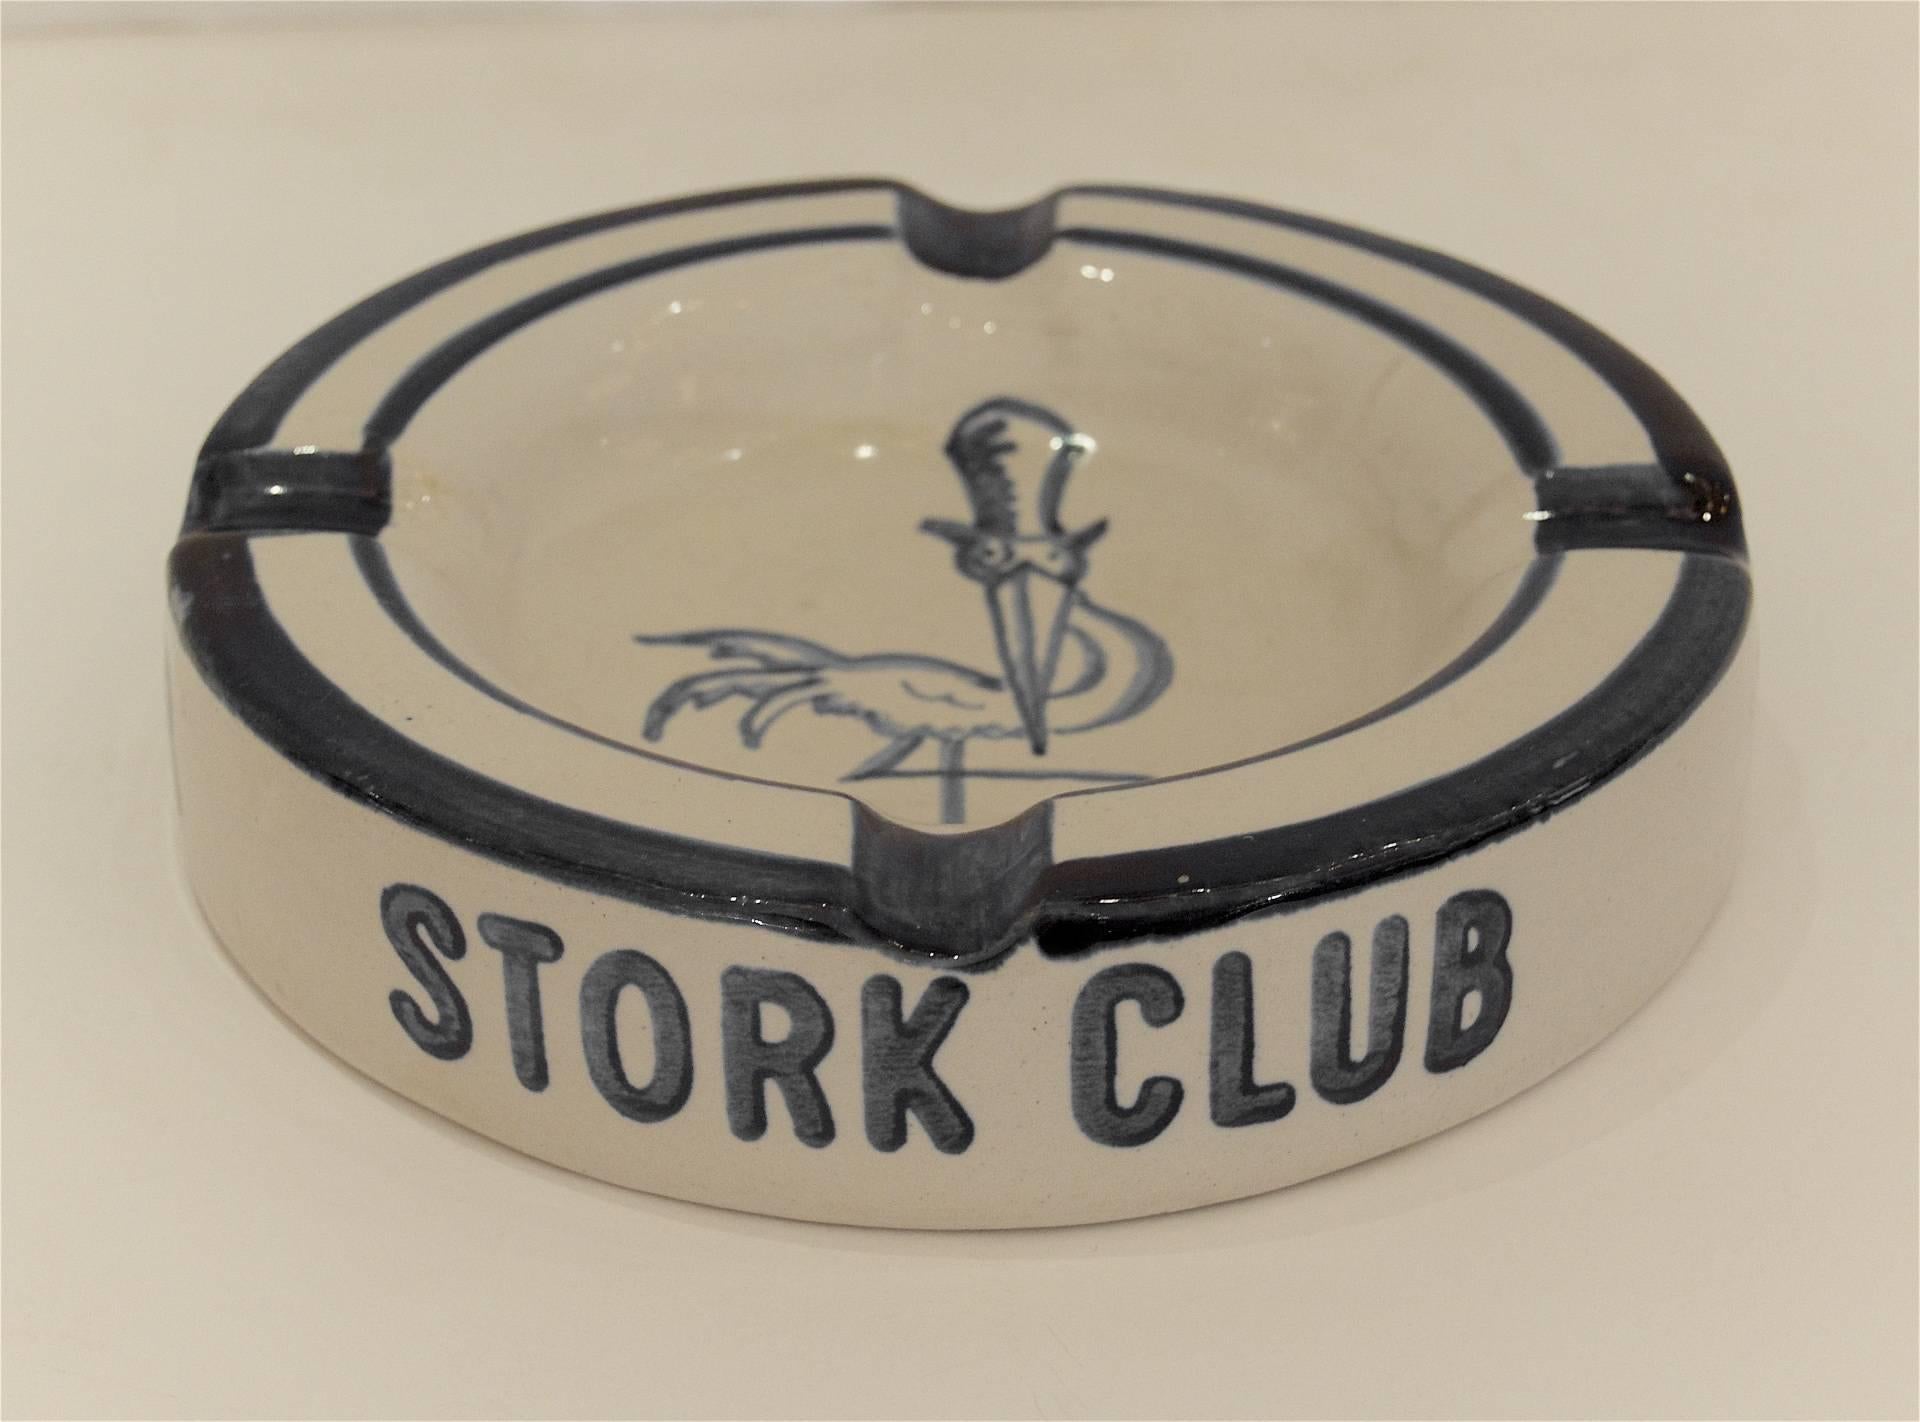 Original stoneware ashtray made by John B Taylor Ceramics for the Stork Club in the early 1950s.